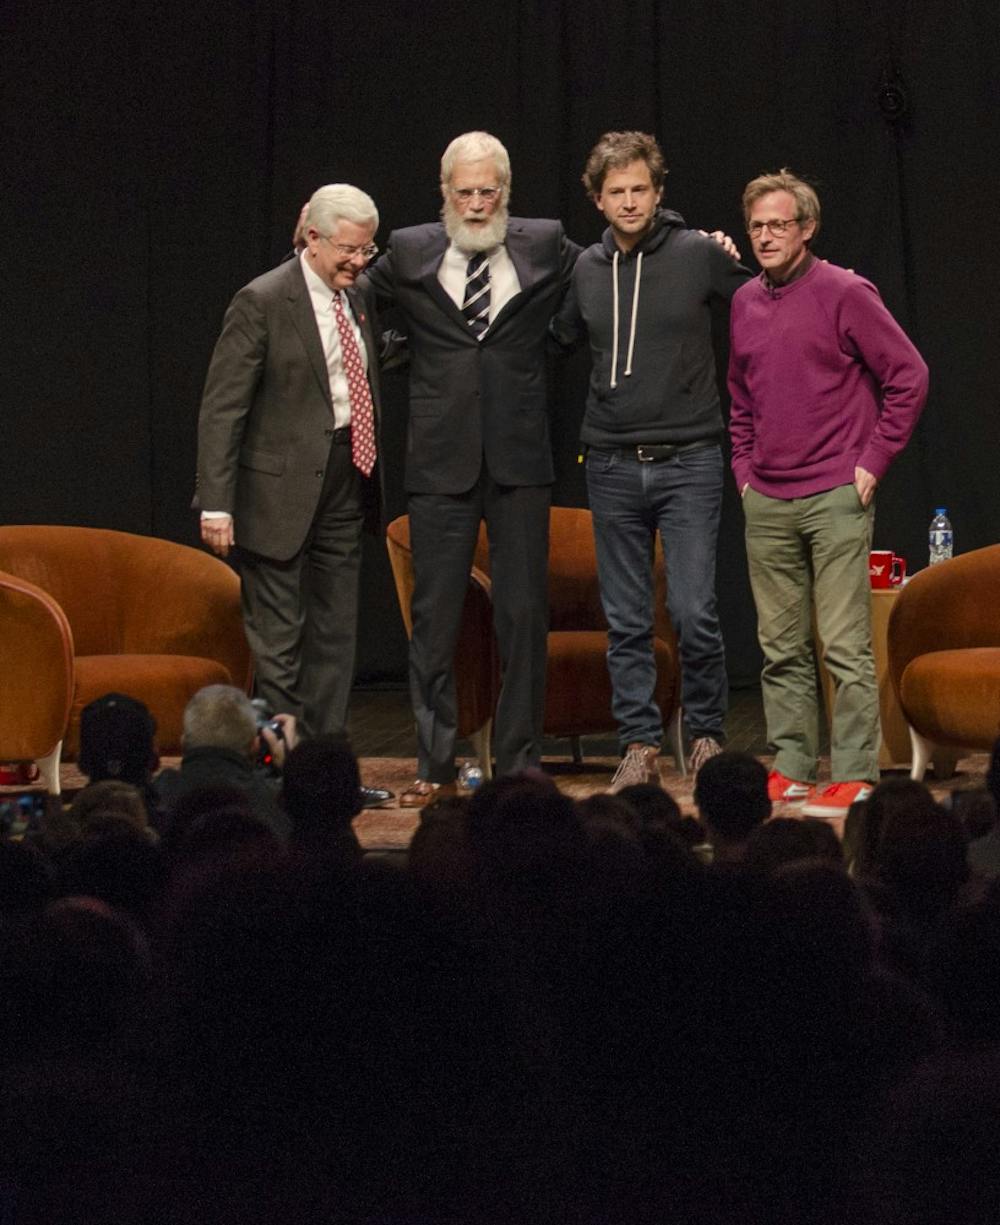 Alumnus David Letterman came to Ball State with filmmakers Spike Jonze and Bennett Miller on Nov. 30 at John R. Emens Auditorium. The three discussed making it in the industry. Jonze and Miller also directed a scene Letterman had done early in his career with two Ball State theatre students. DN PHOTO BREANNA DAUGHERTY